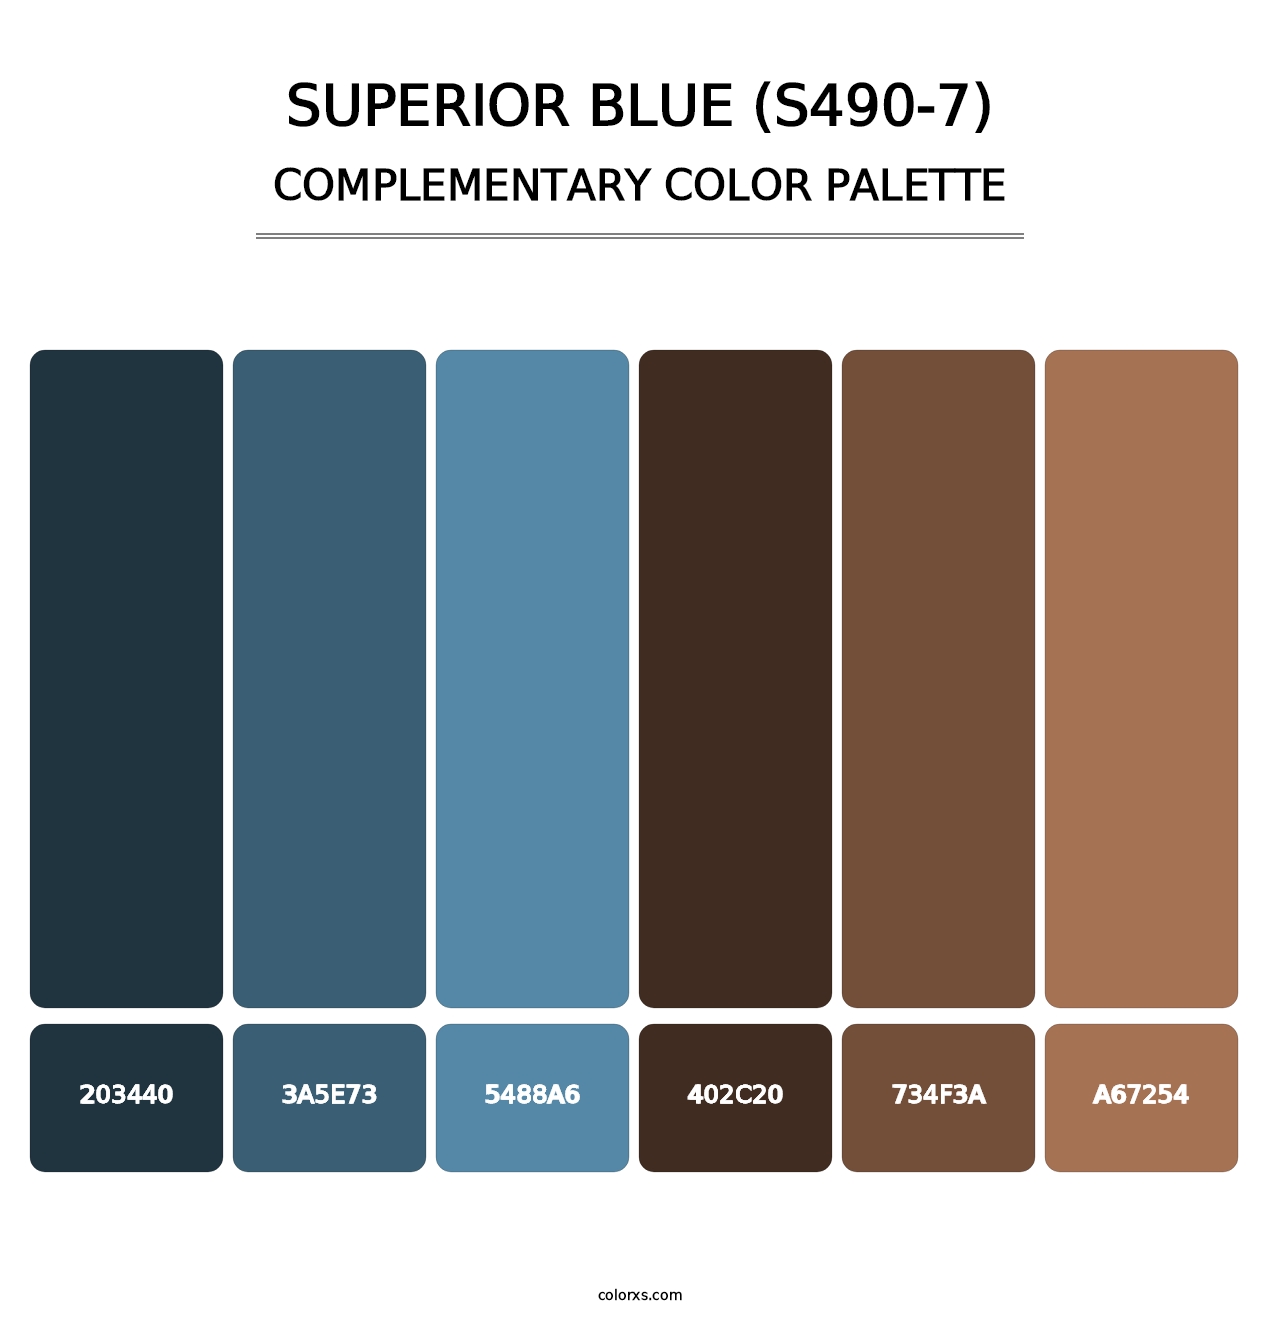 Superior Blue (S490-7) - Complementary Color Palette